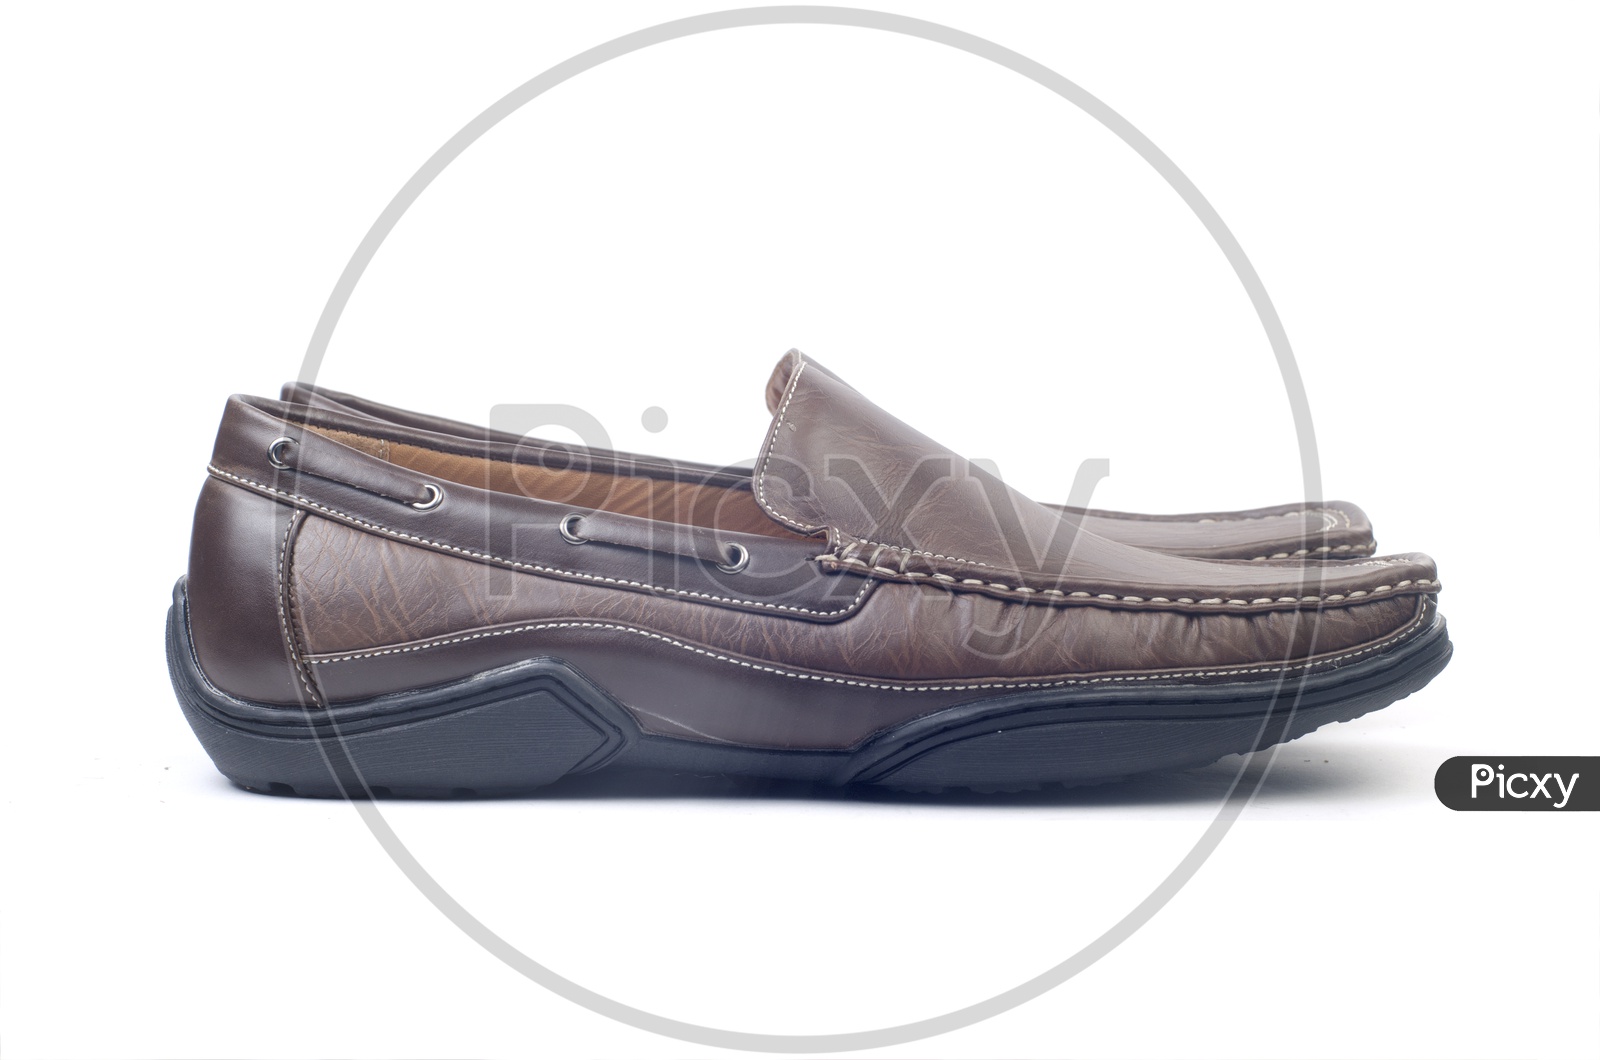 Pair of Men's Brown Leather Shoe  Isolated Over an White Background